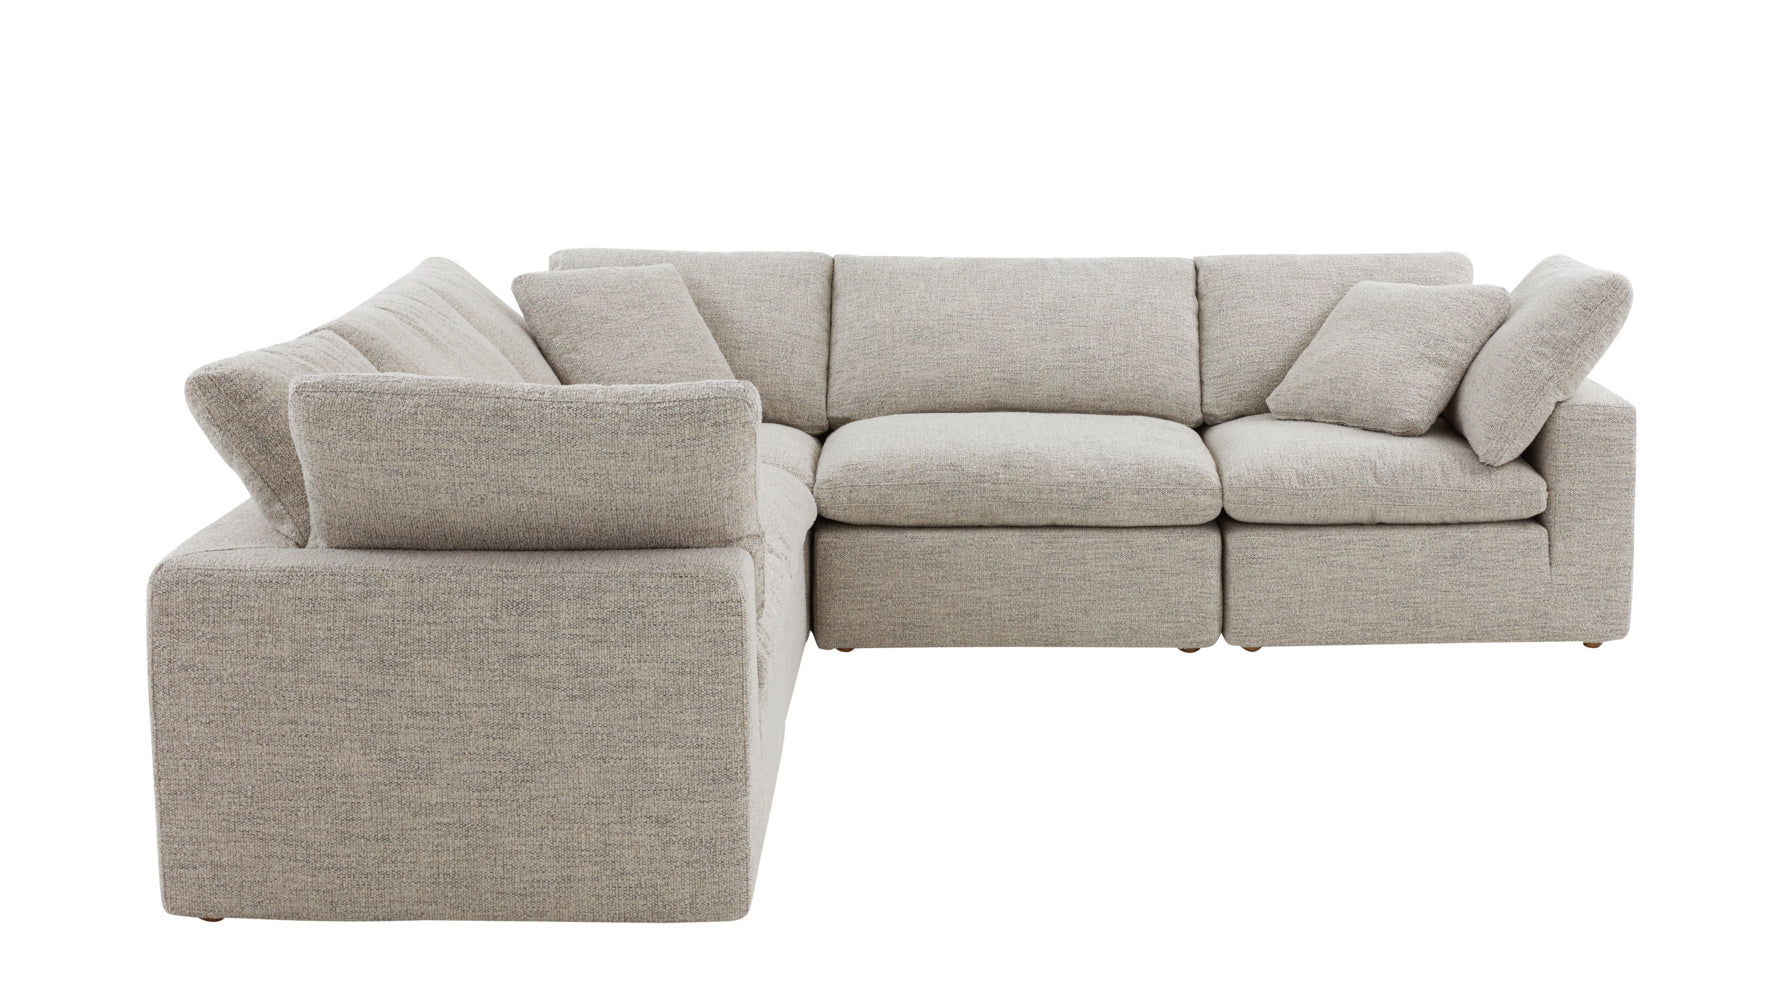 Movie Night™ 5-Piece Modular Sectional Closed, Large, Oatmeal - Image 7